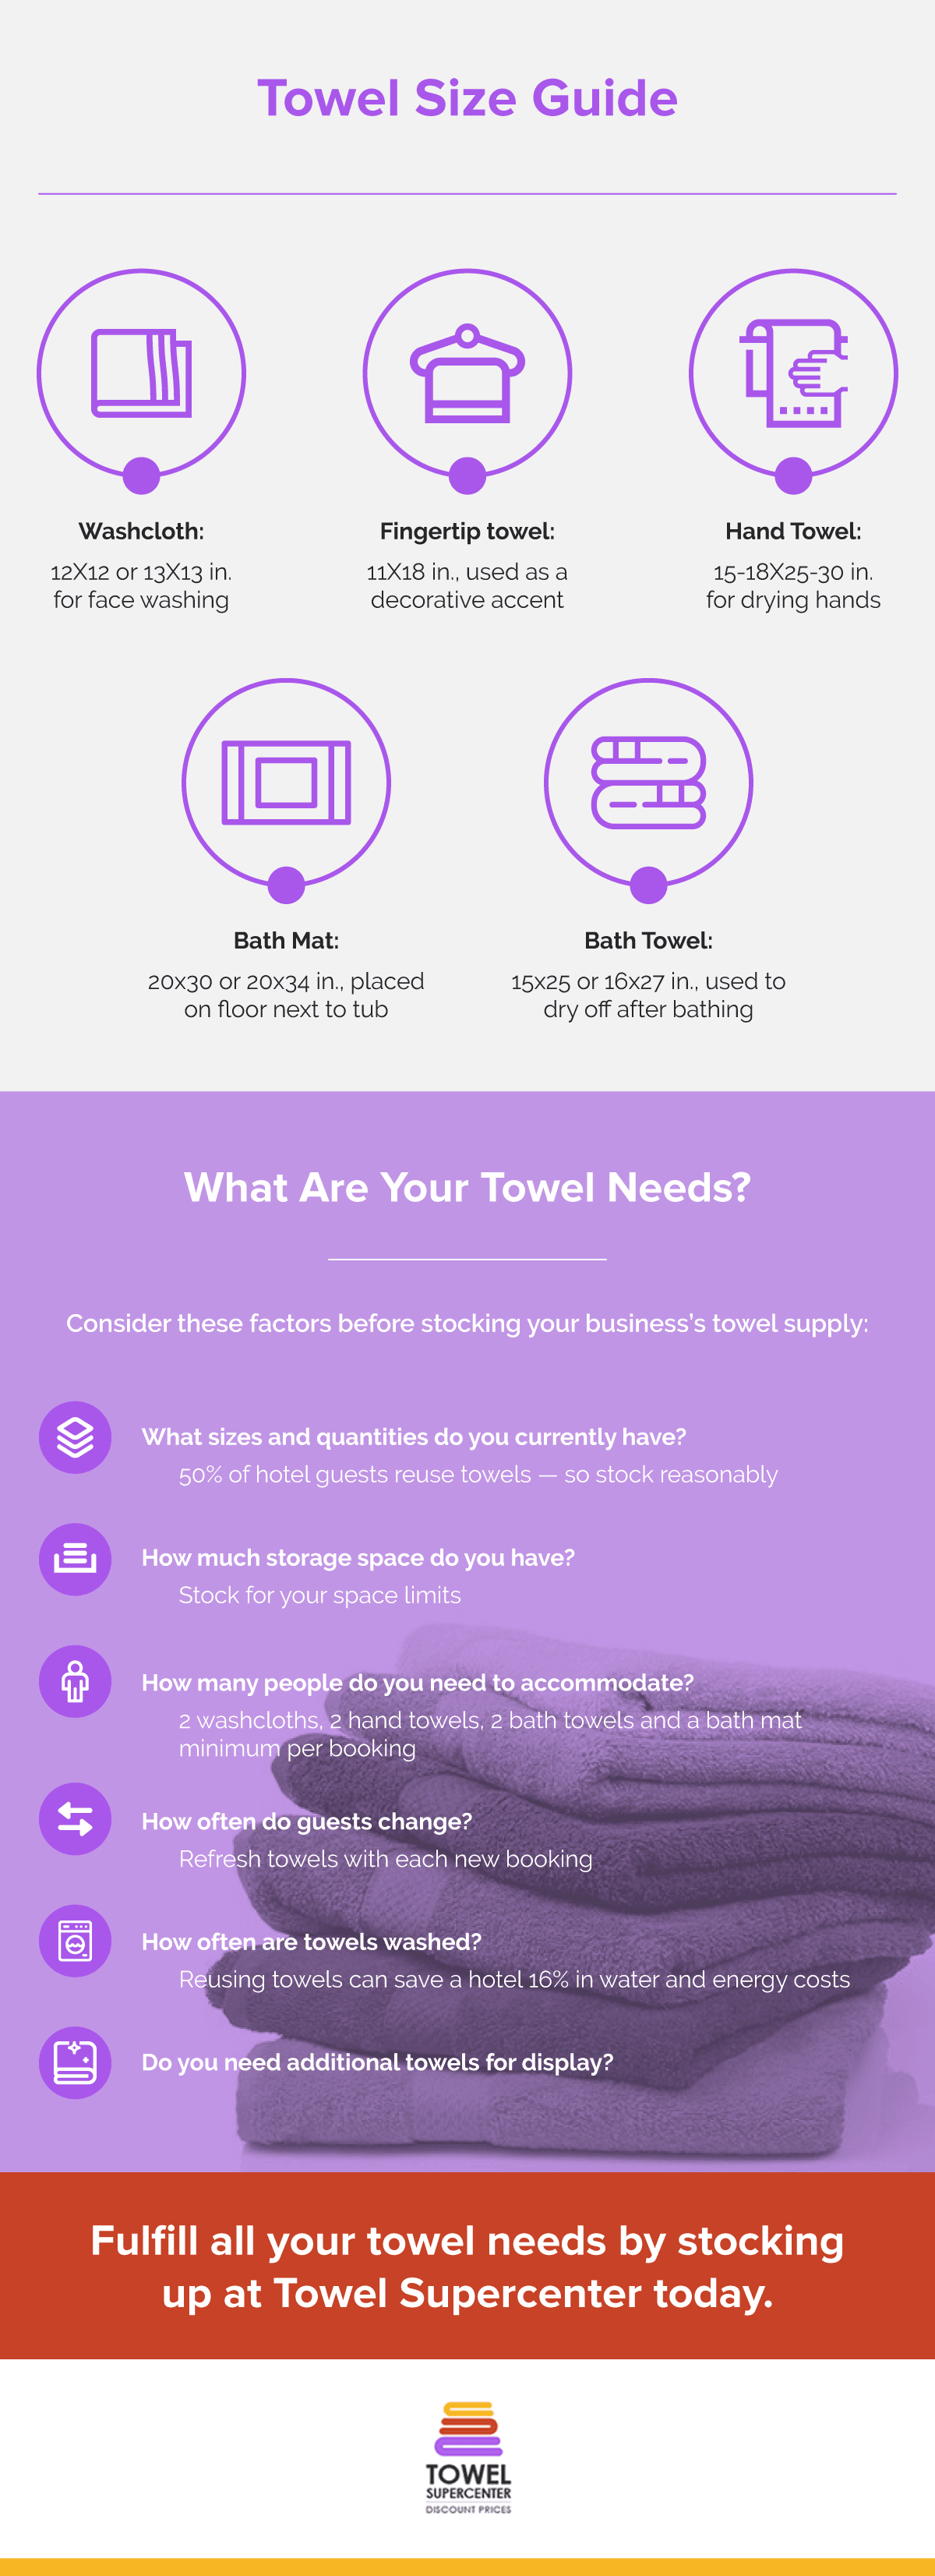 Review our towel size chart and discover which towel size is right for you!